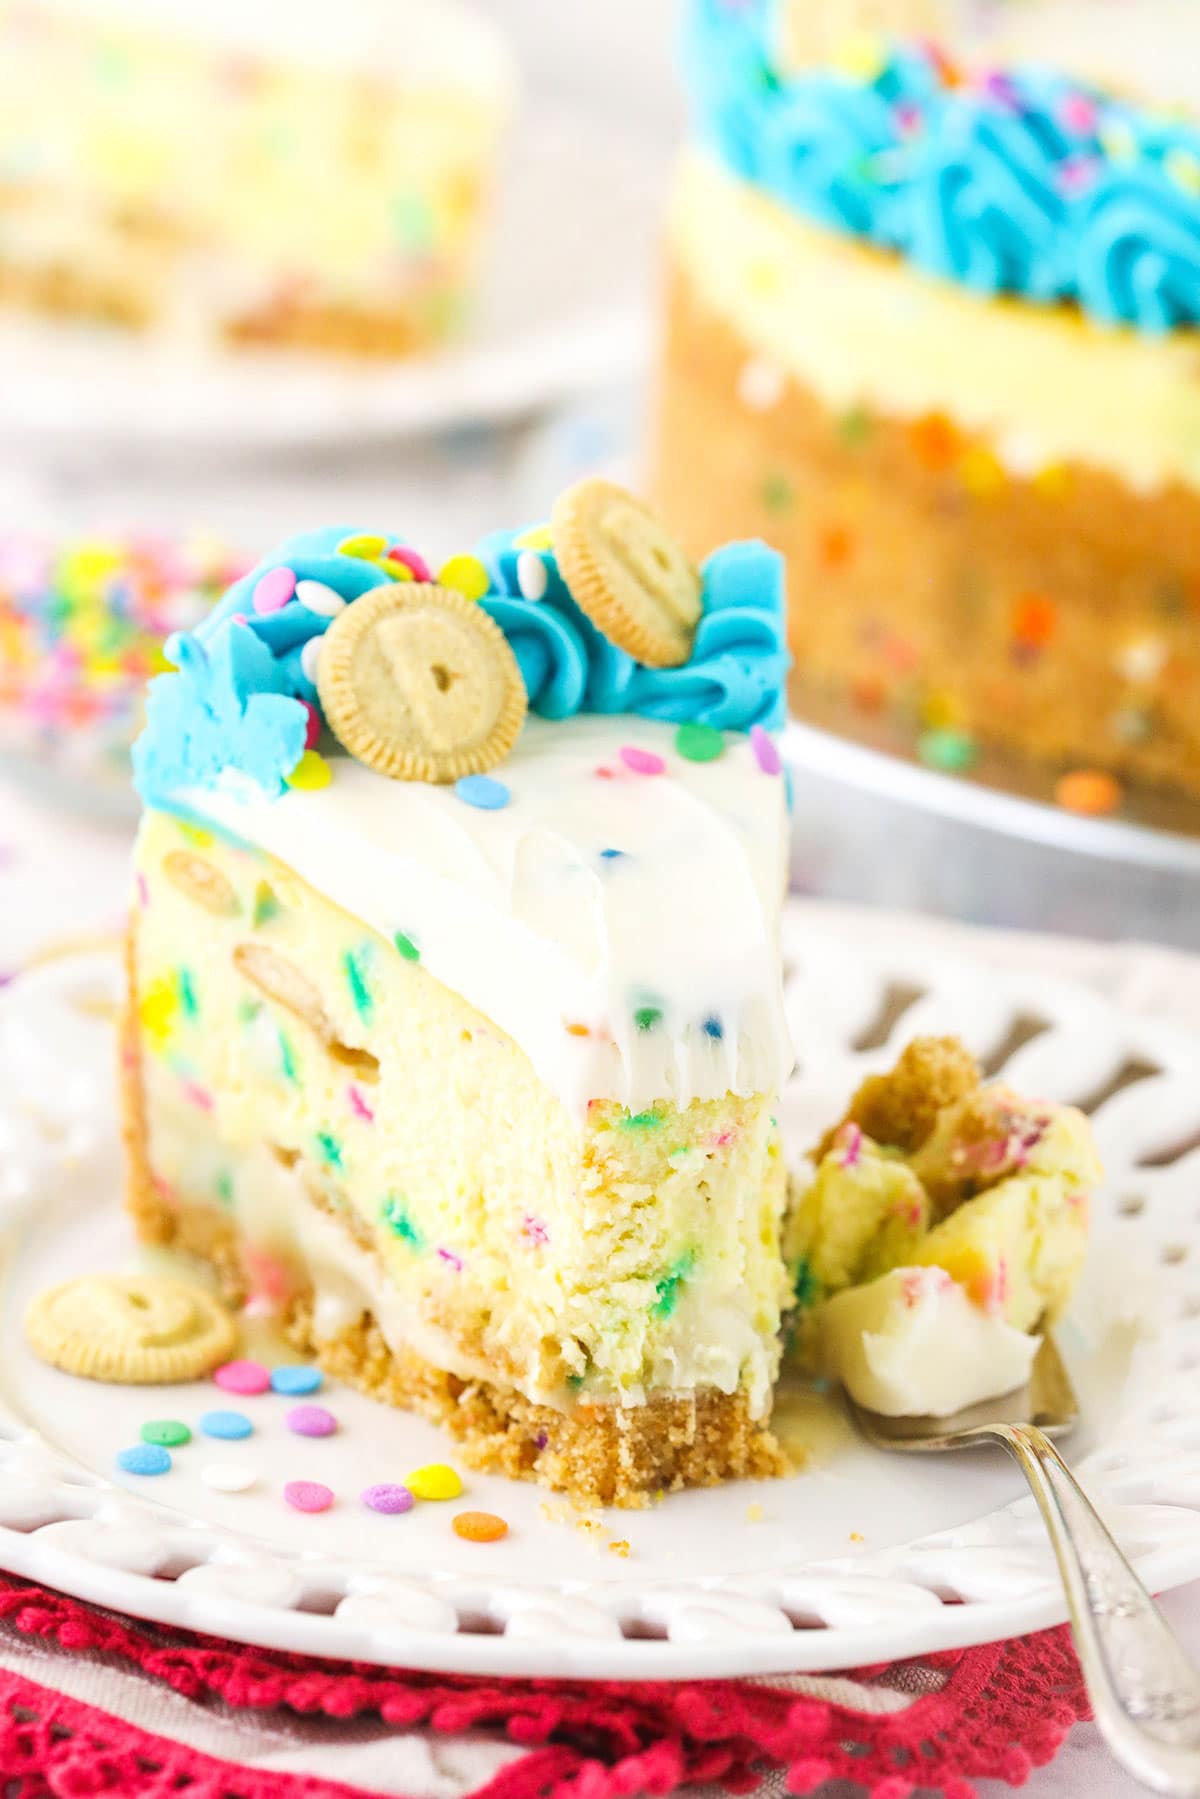 A slice of Dunkaroos cheesecake on a plate with one bite on a fork